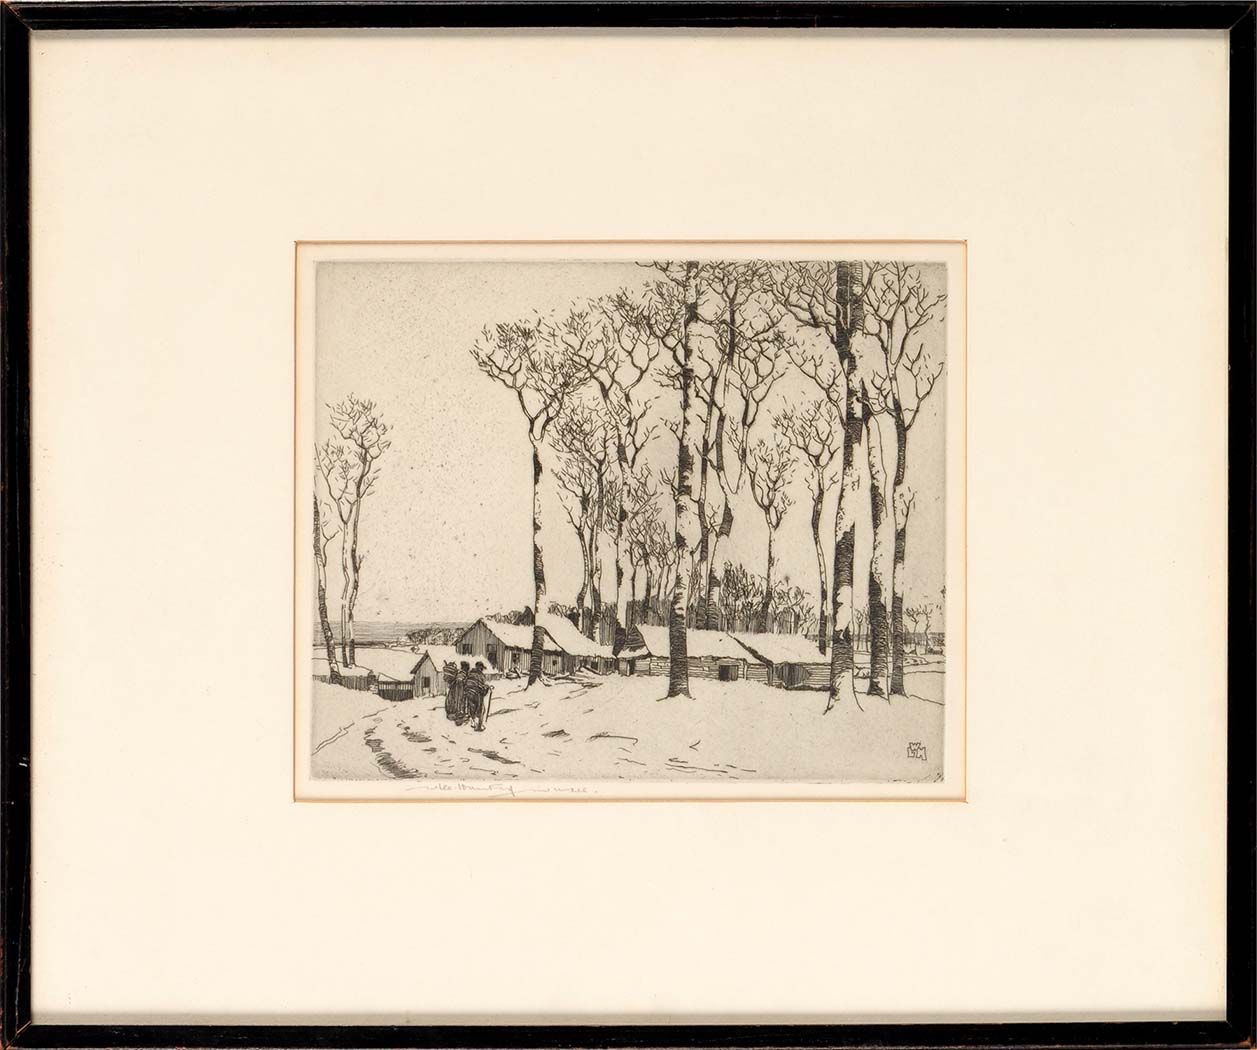 William Lee Hankey, RWS, RI, ROI, RE, NS
(1869-1952)
"WINTER"
signed in pencil and monogrammed in